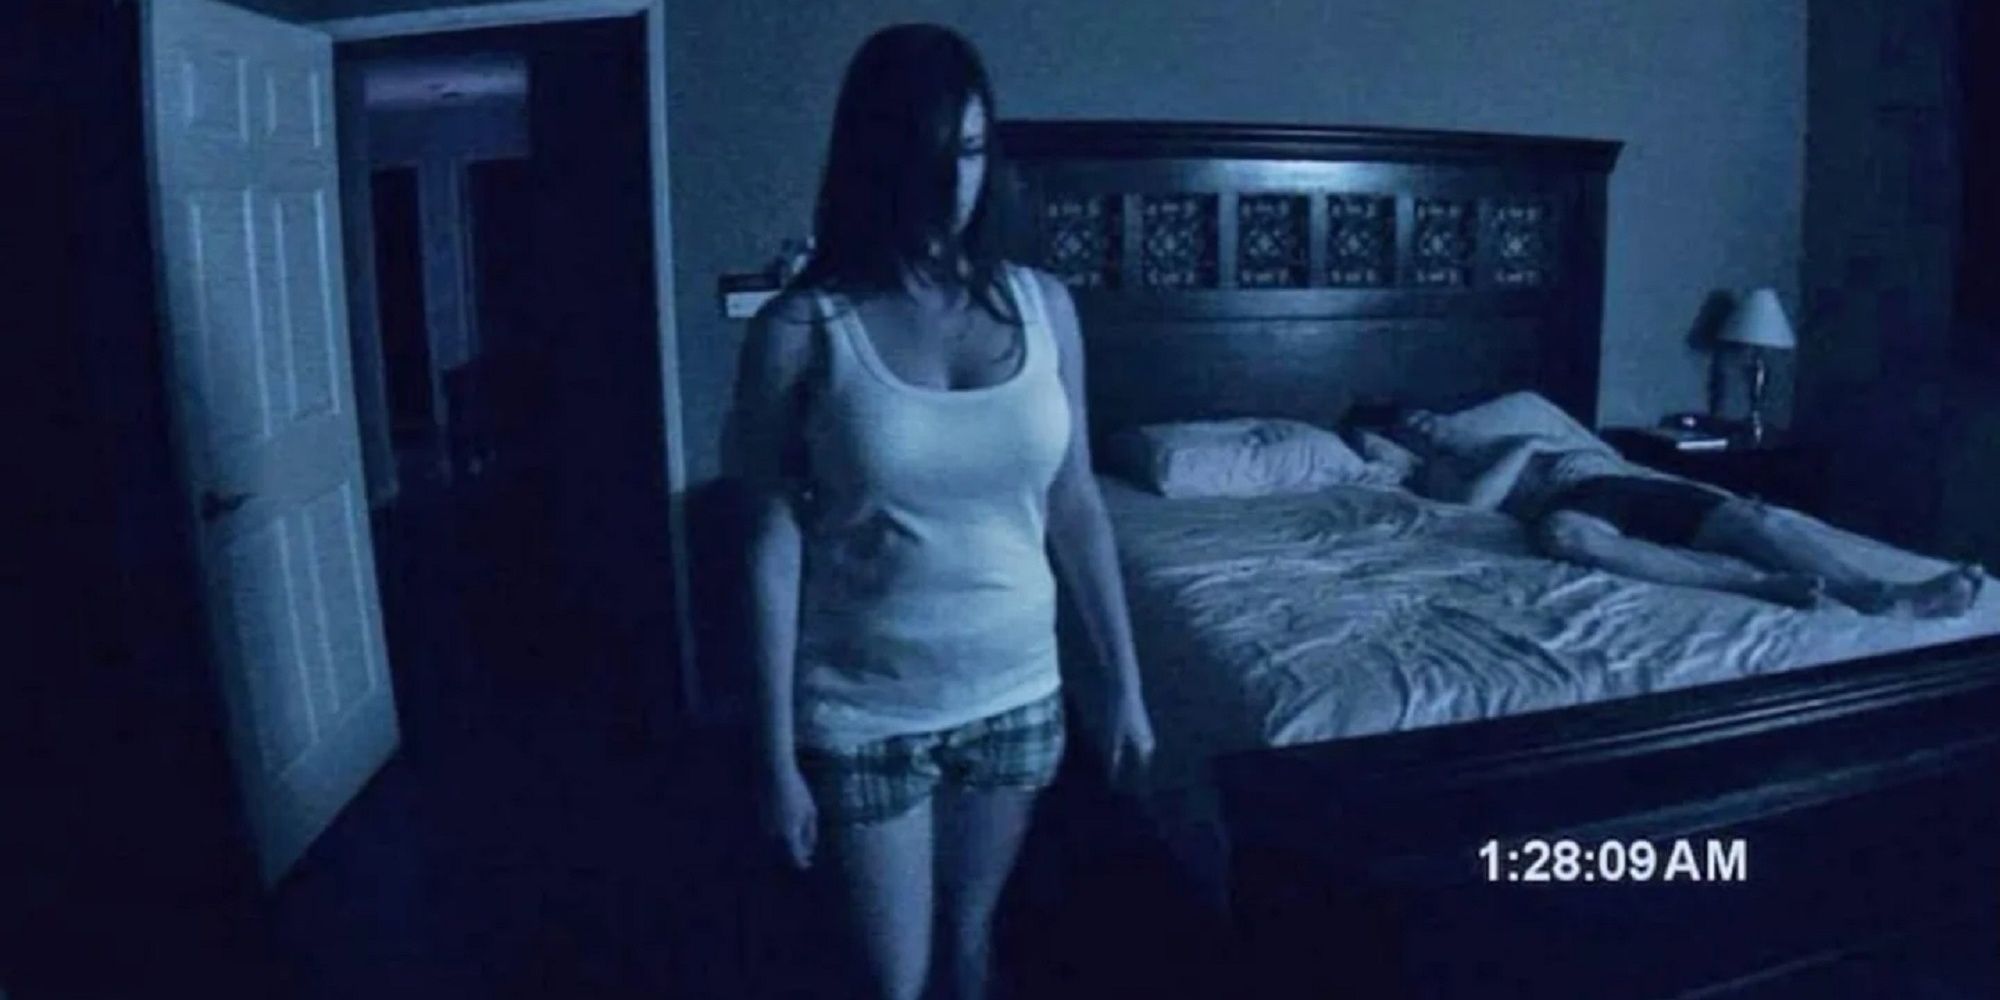 Katie stands up in the middle of the night while in 'Paranormal Activity.